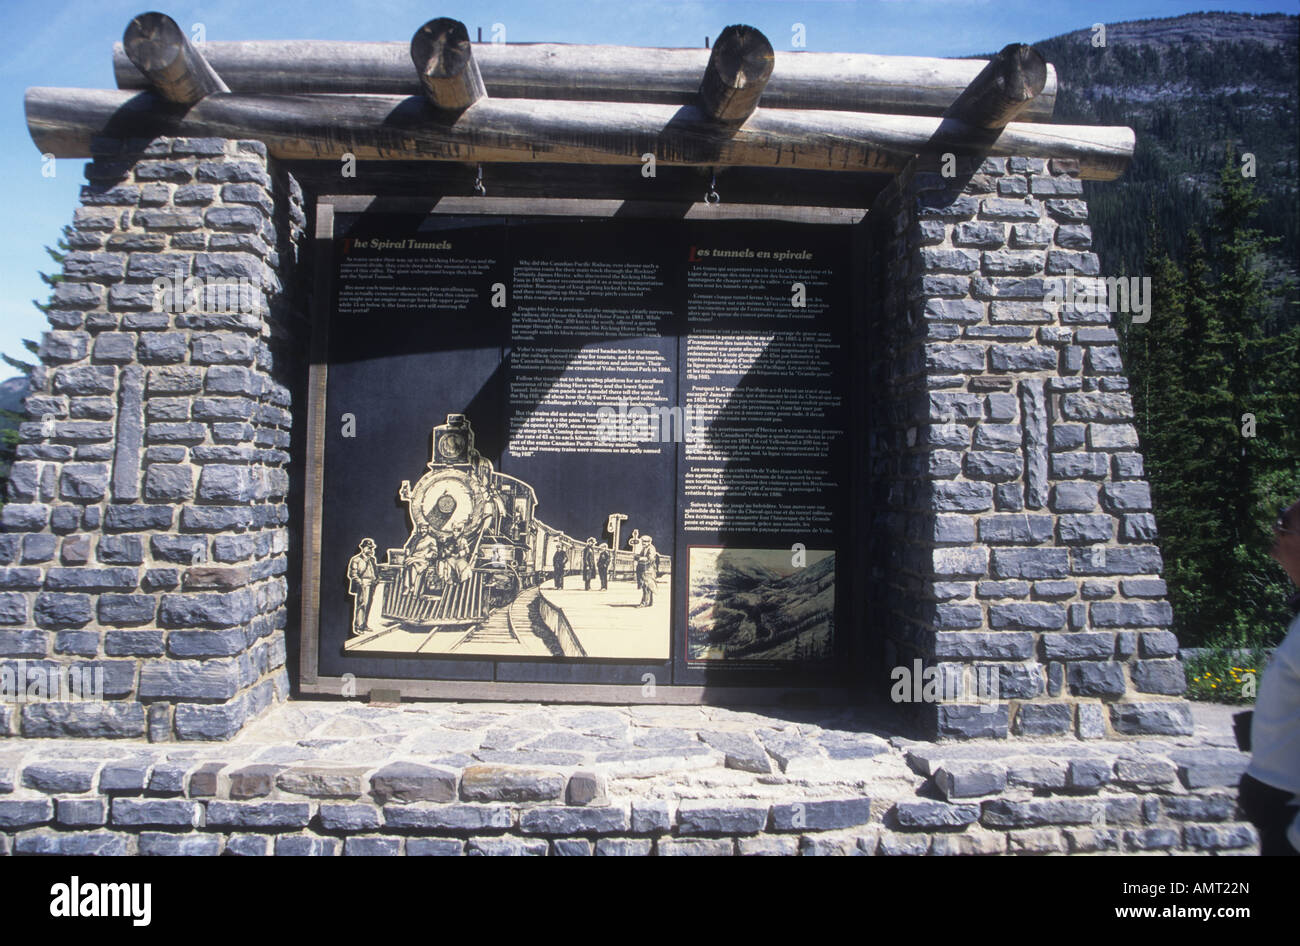 Canadian Pacific Railway memorial  to the Chinese workers who died building the railway  at Kicking Horse Pass,British Columbia Stock Photo